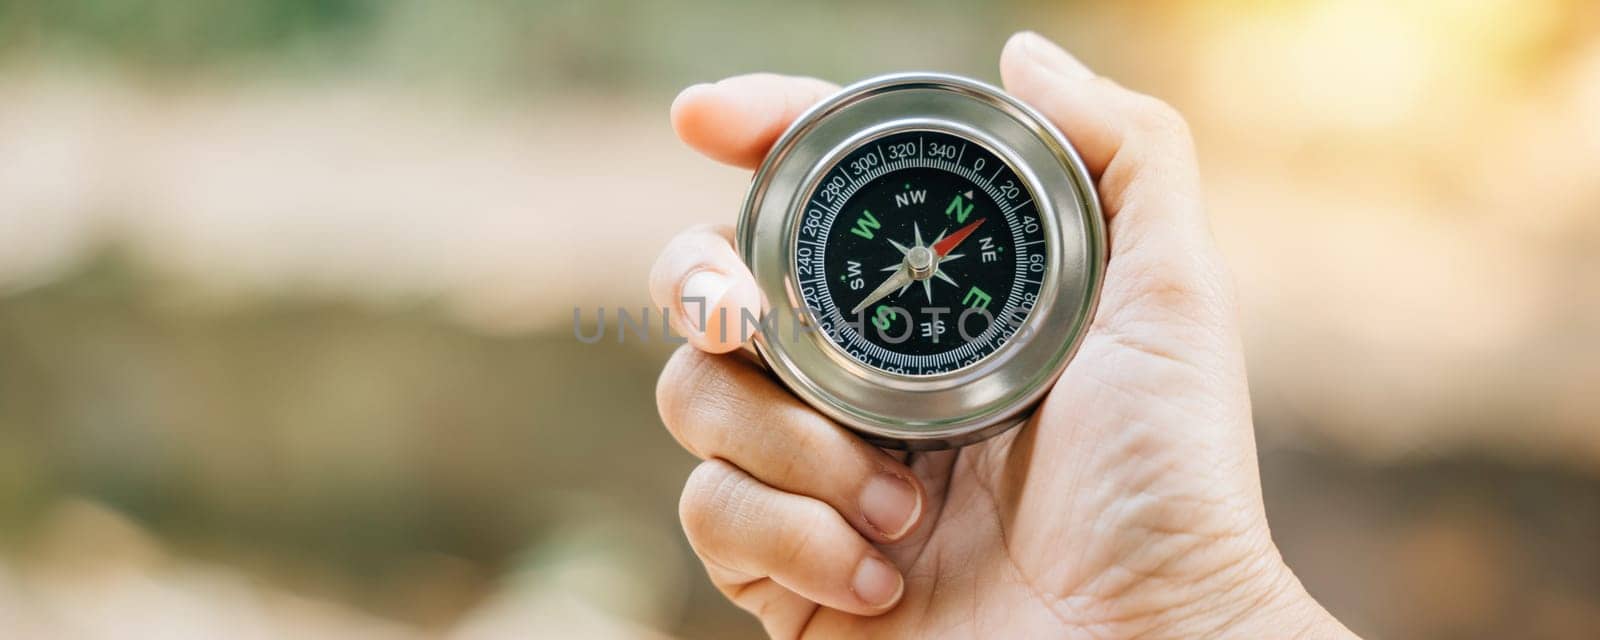 Traveler grasps a compass in park using it to overcome confusion. compass in her hand symbolizes guidance and exploration against nature-blurred backdrop she embarks on journey of discovery in forest. by Sorapop